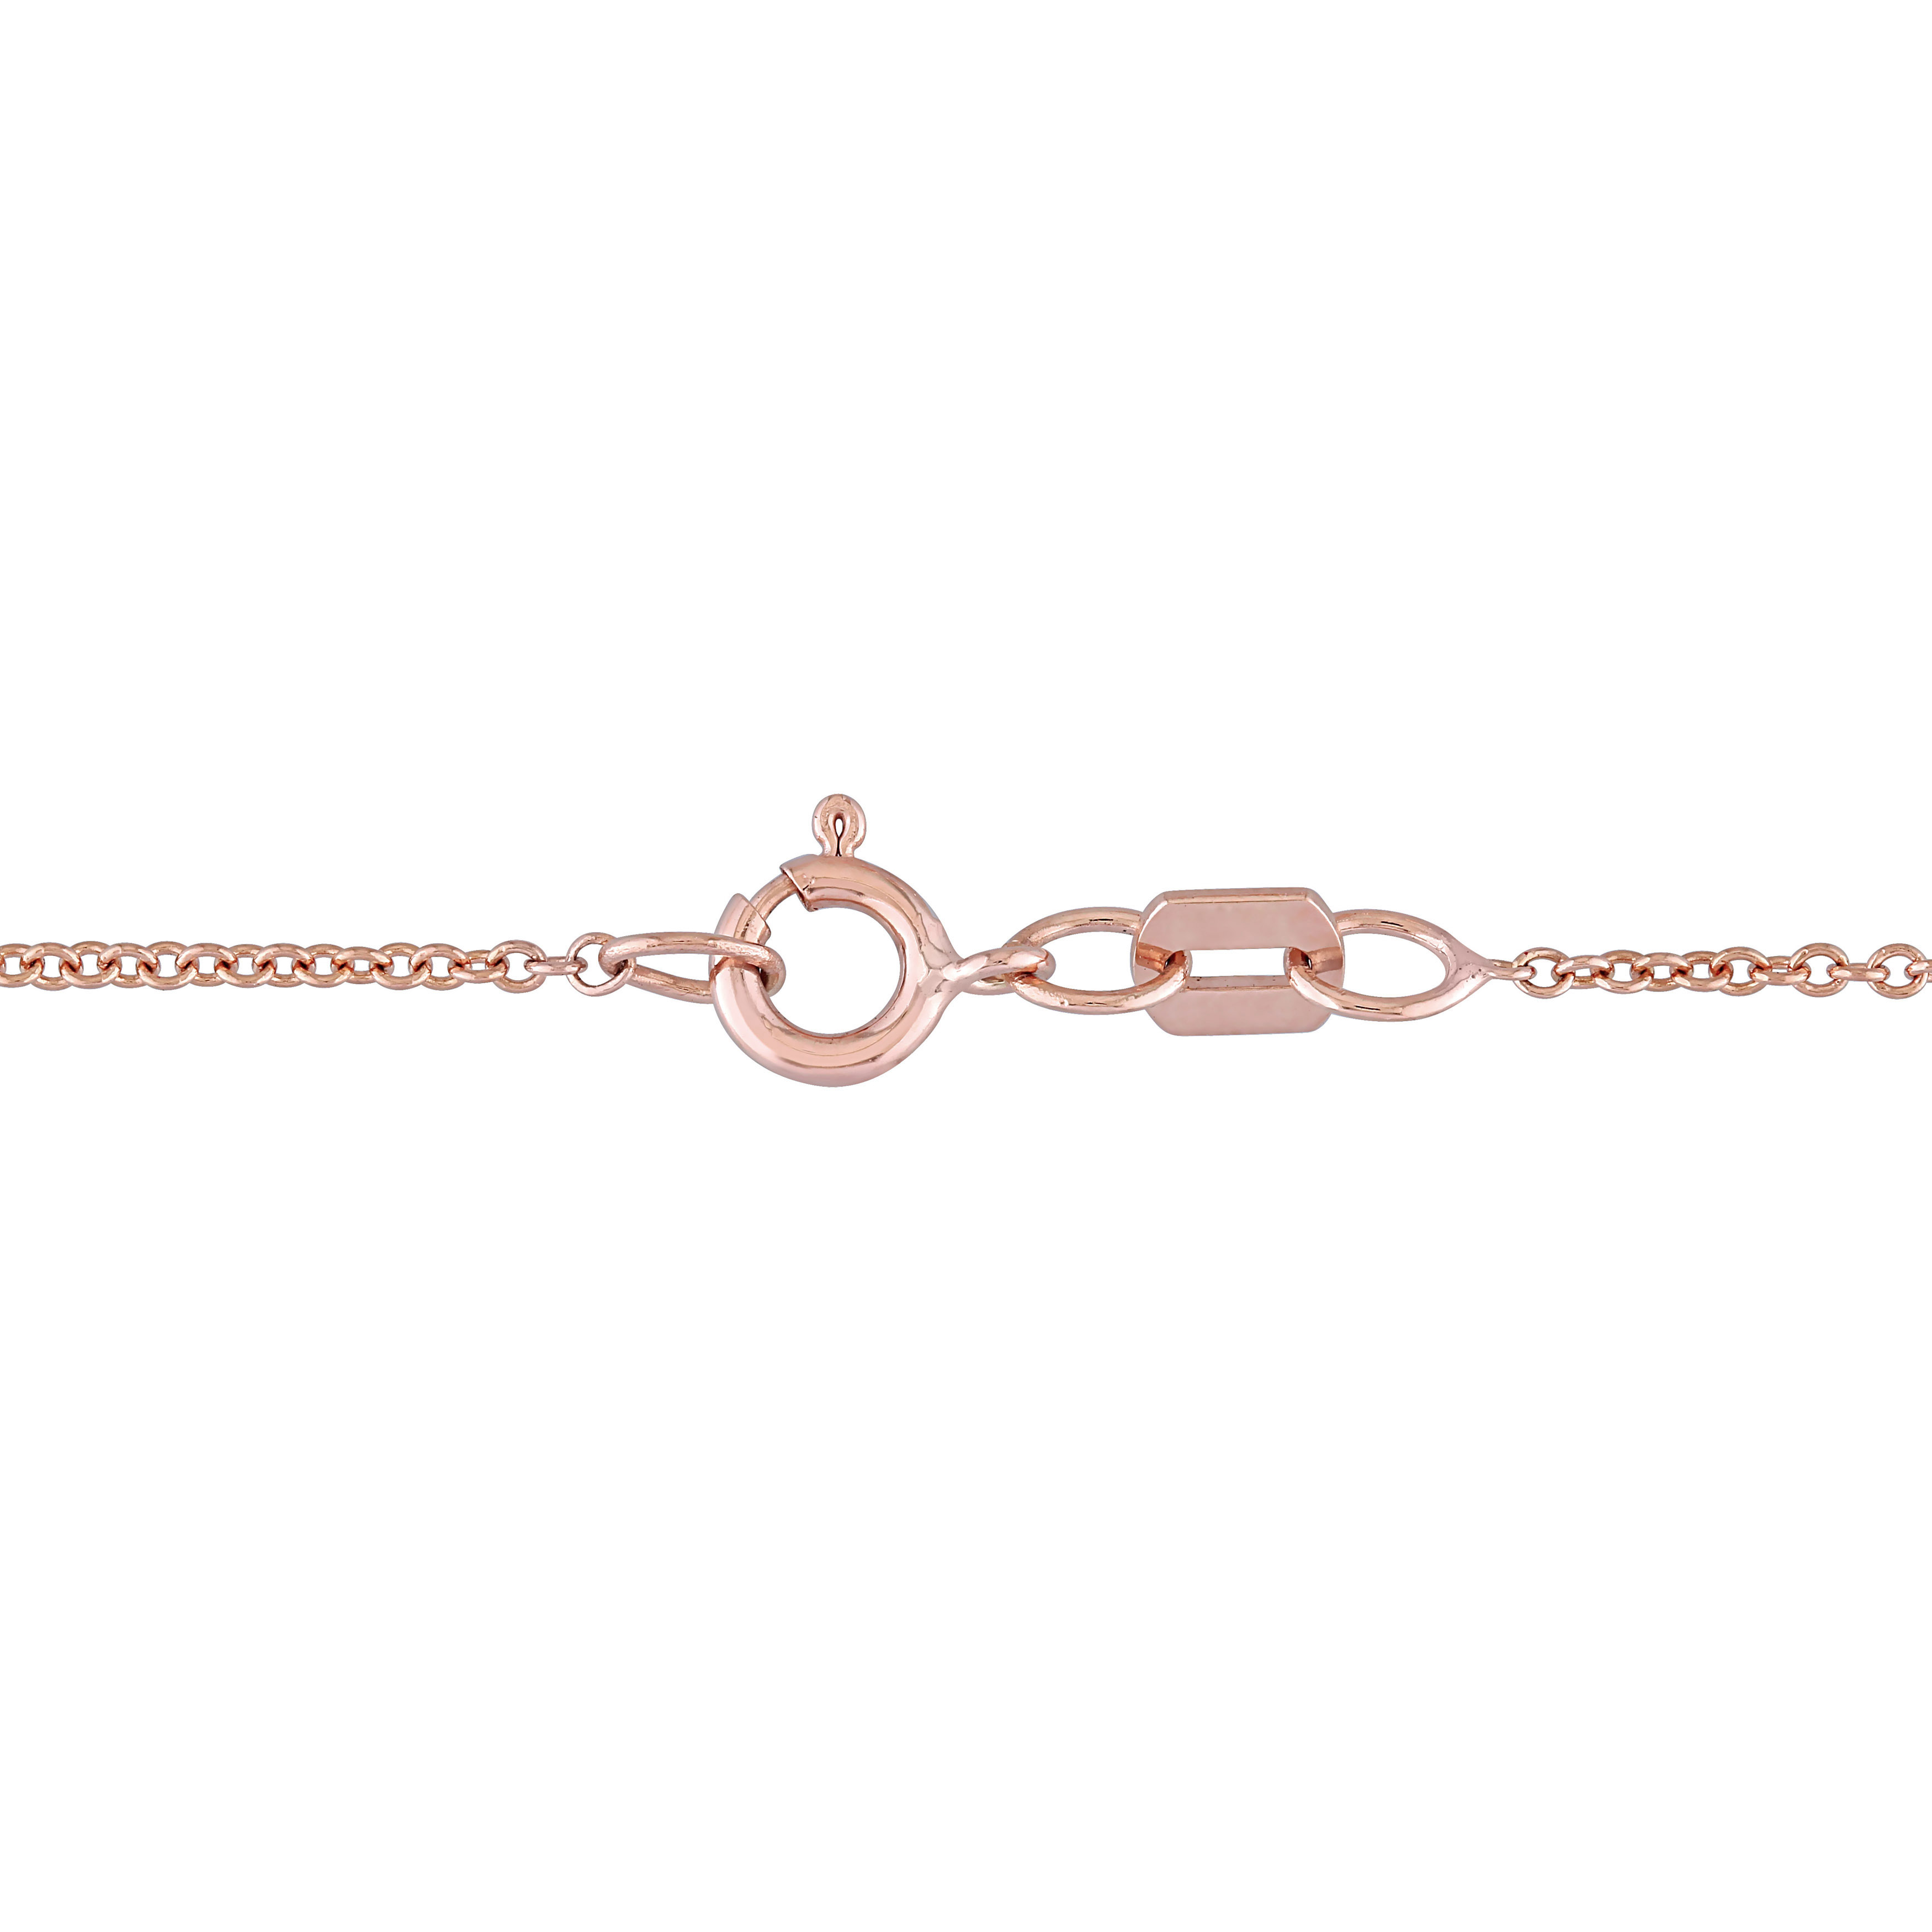 1 1/3 CT TGW Apatite and 1/10 CT TW Diamond Twisted Halo Necklace in 10k Rose Gold - 17 in.